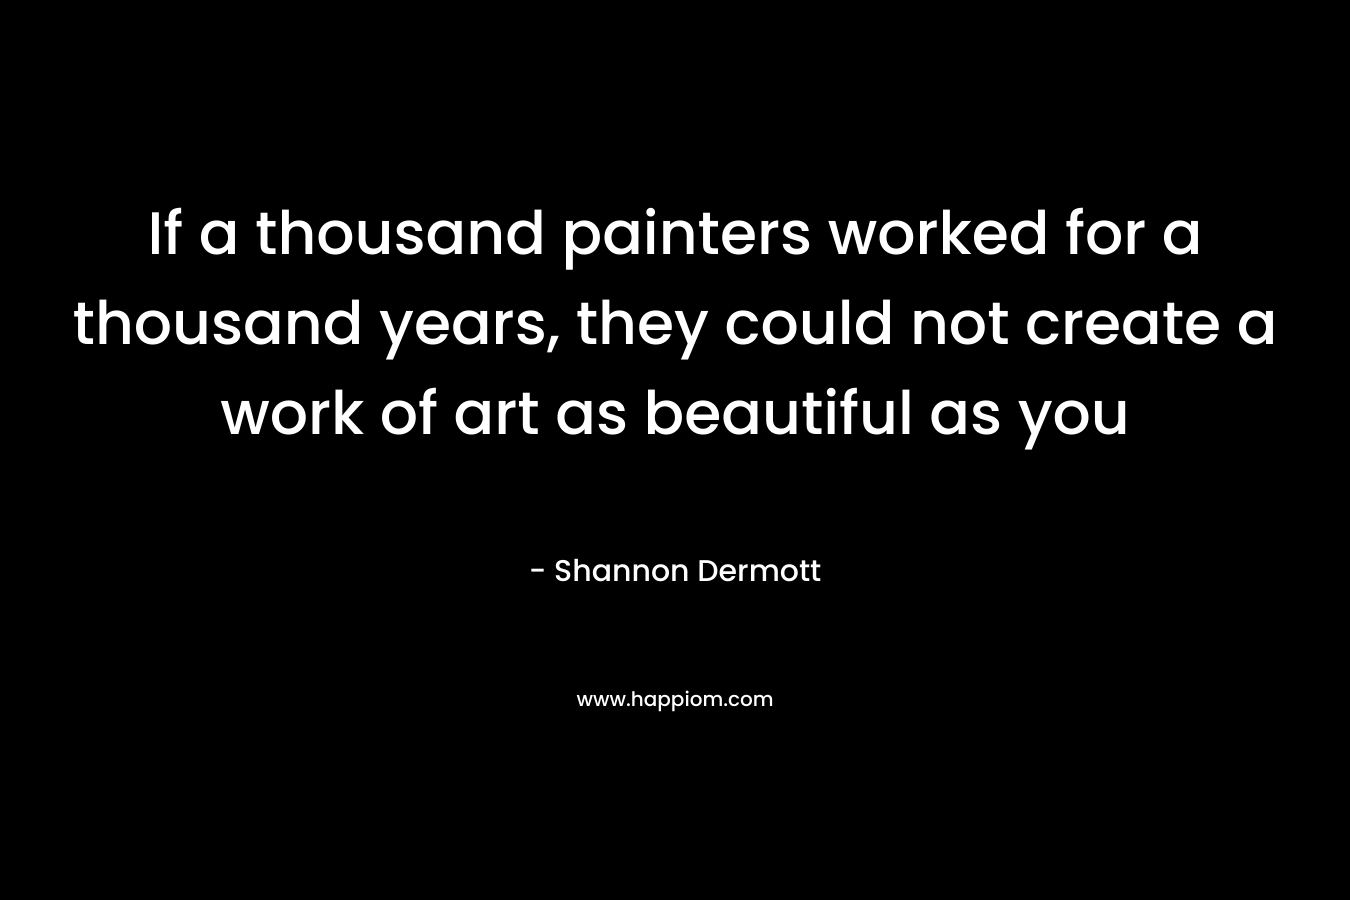 If a thousand painters worked for a thousand years, they could not create a work of art as beautiful as you